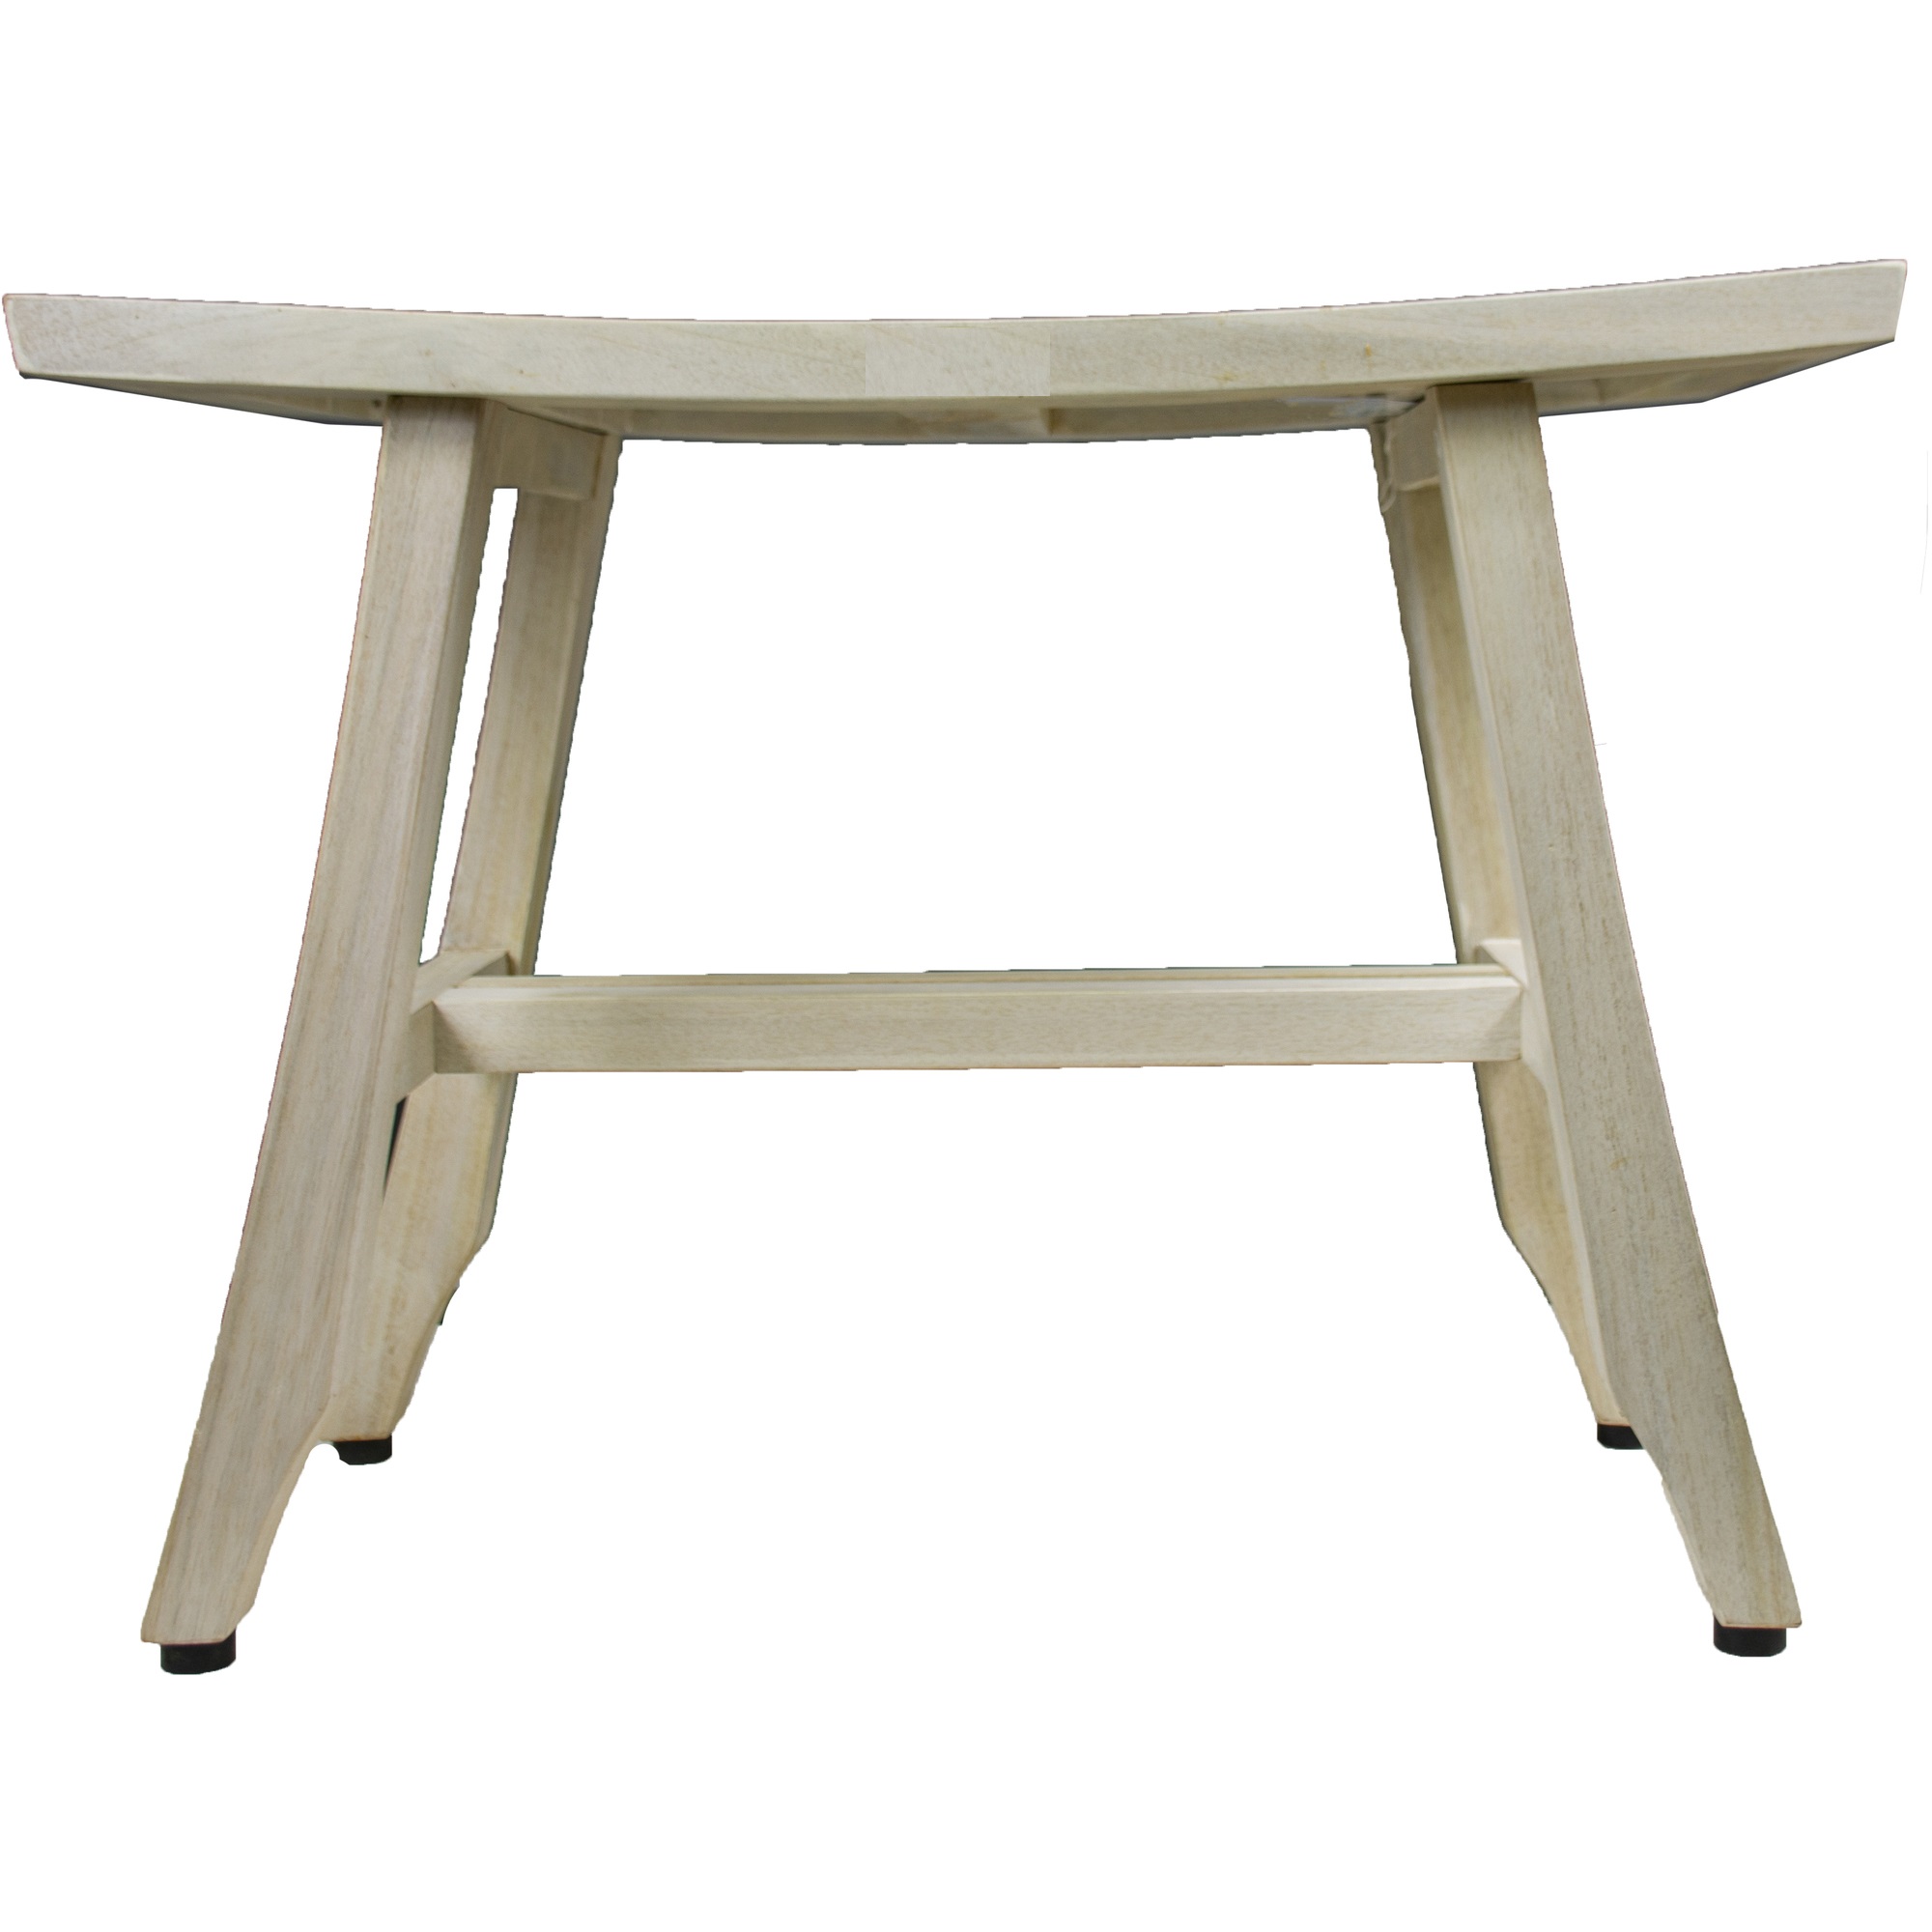 Contemporary Teak Shower Stool or Bench in Whitewash Finish